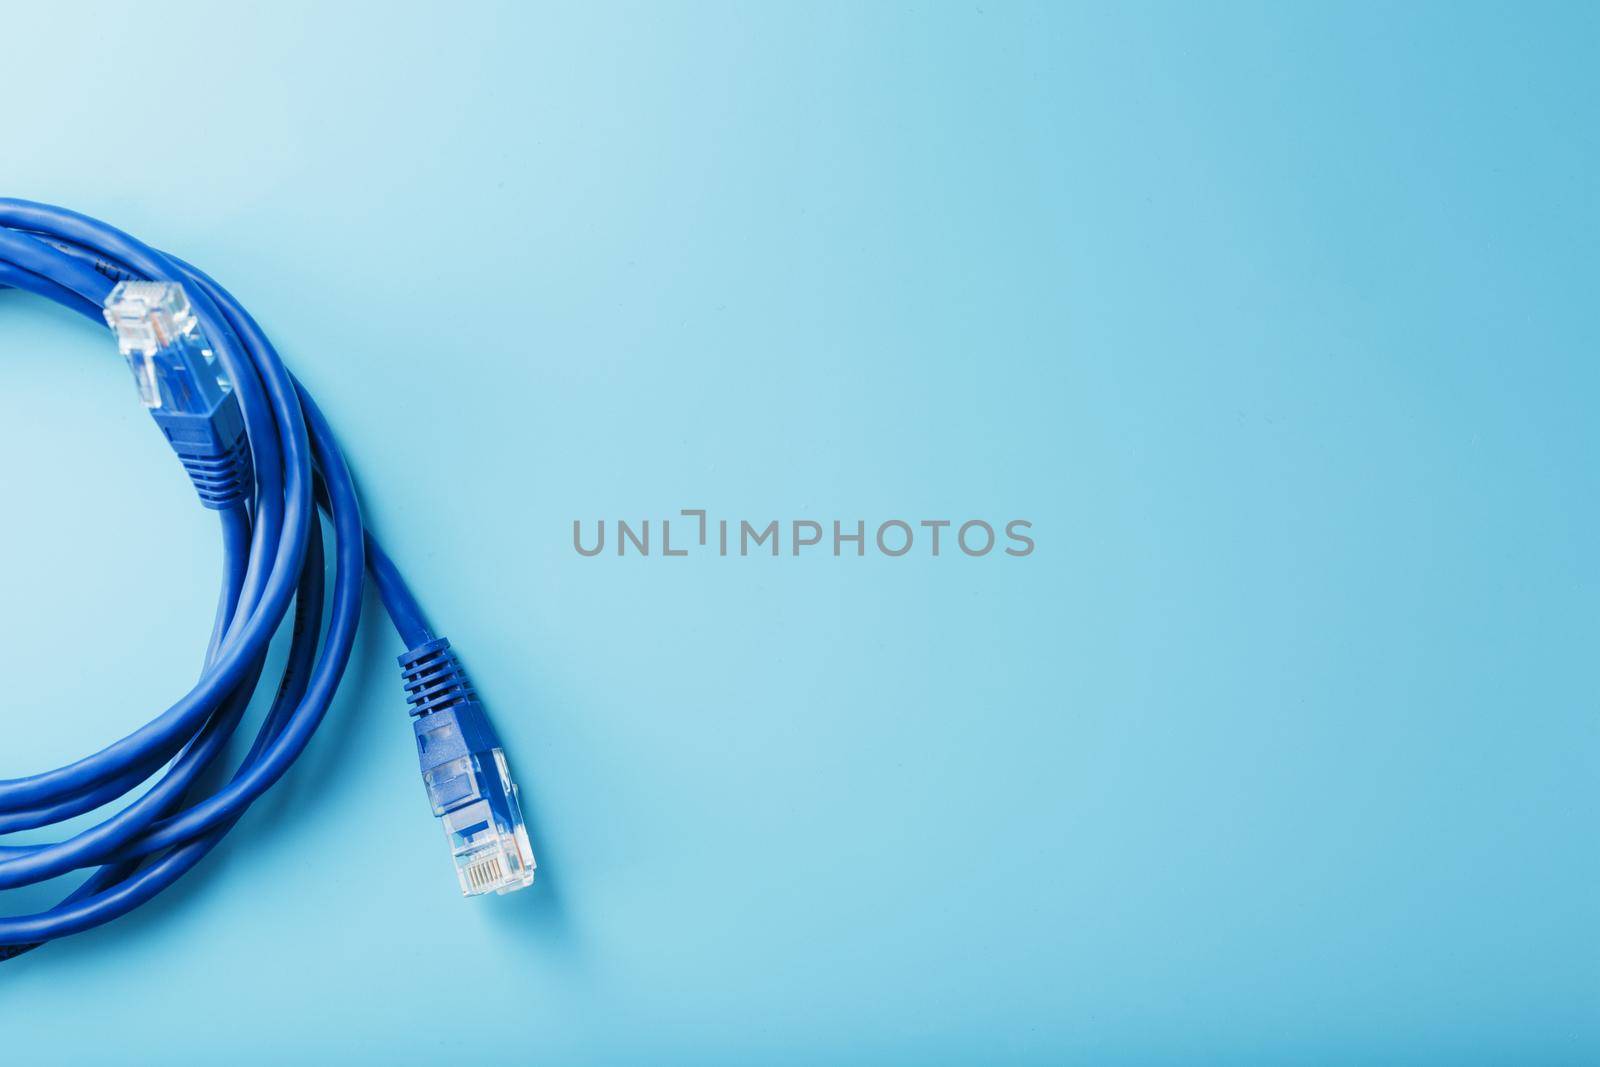 A coil of an Internet network cable for data transmission on a blue background by AlexGrec